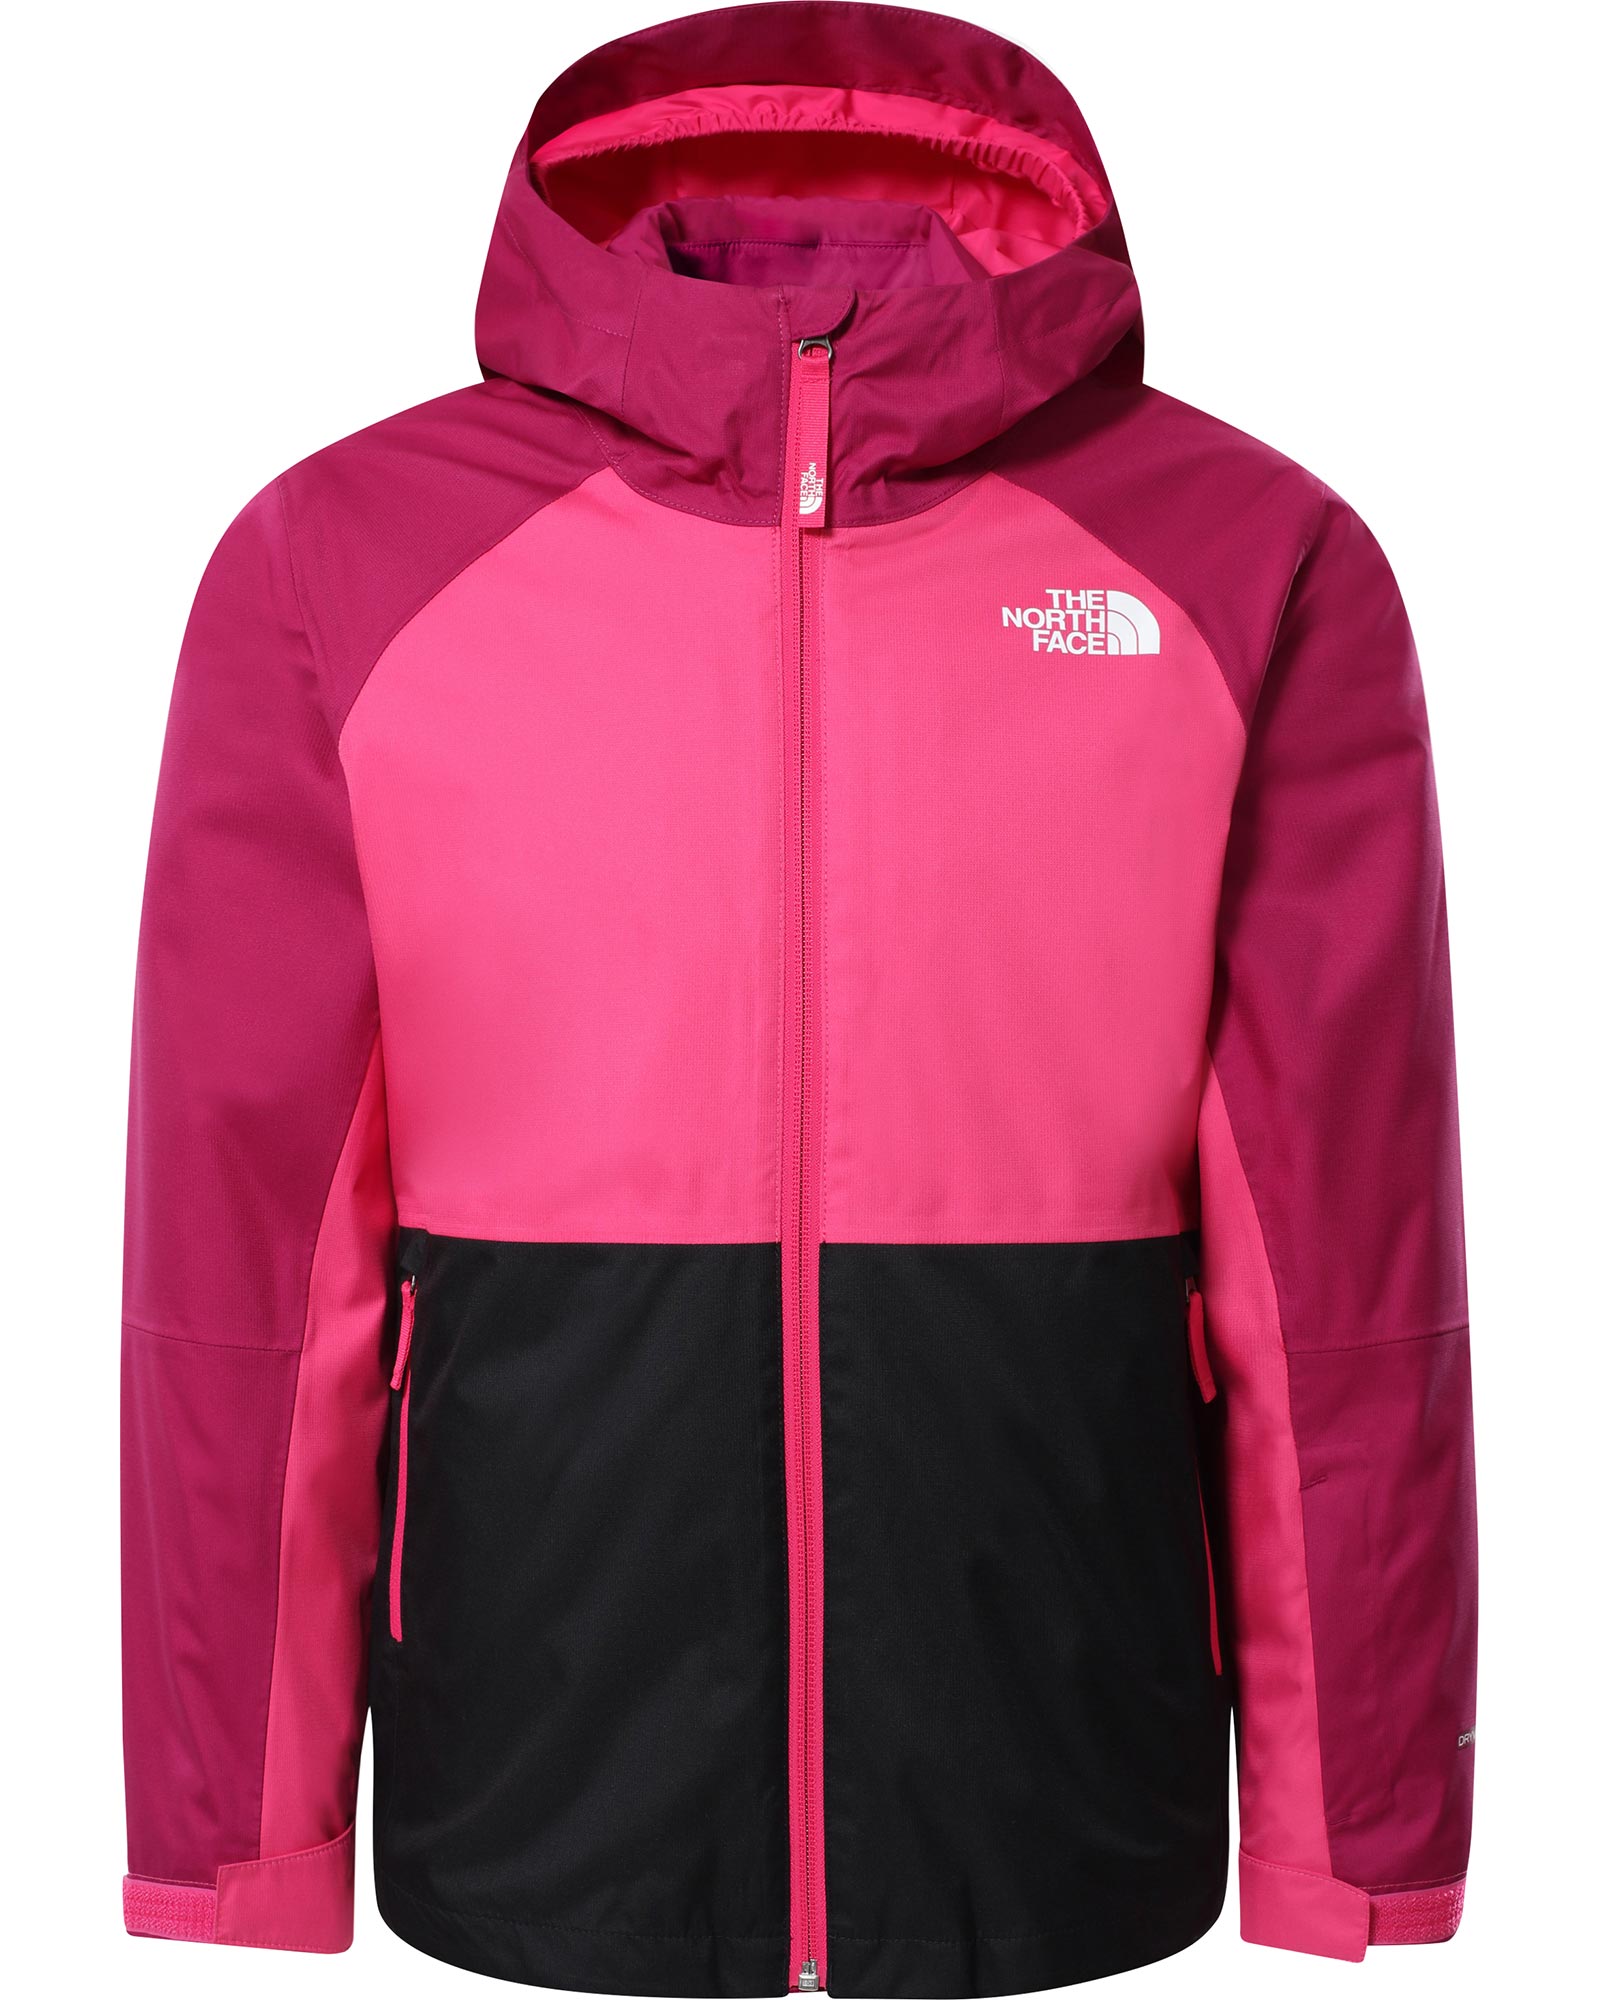 Product image of The North Face Freedom Girls' Triclimate Jacket XLG